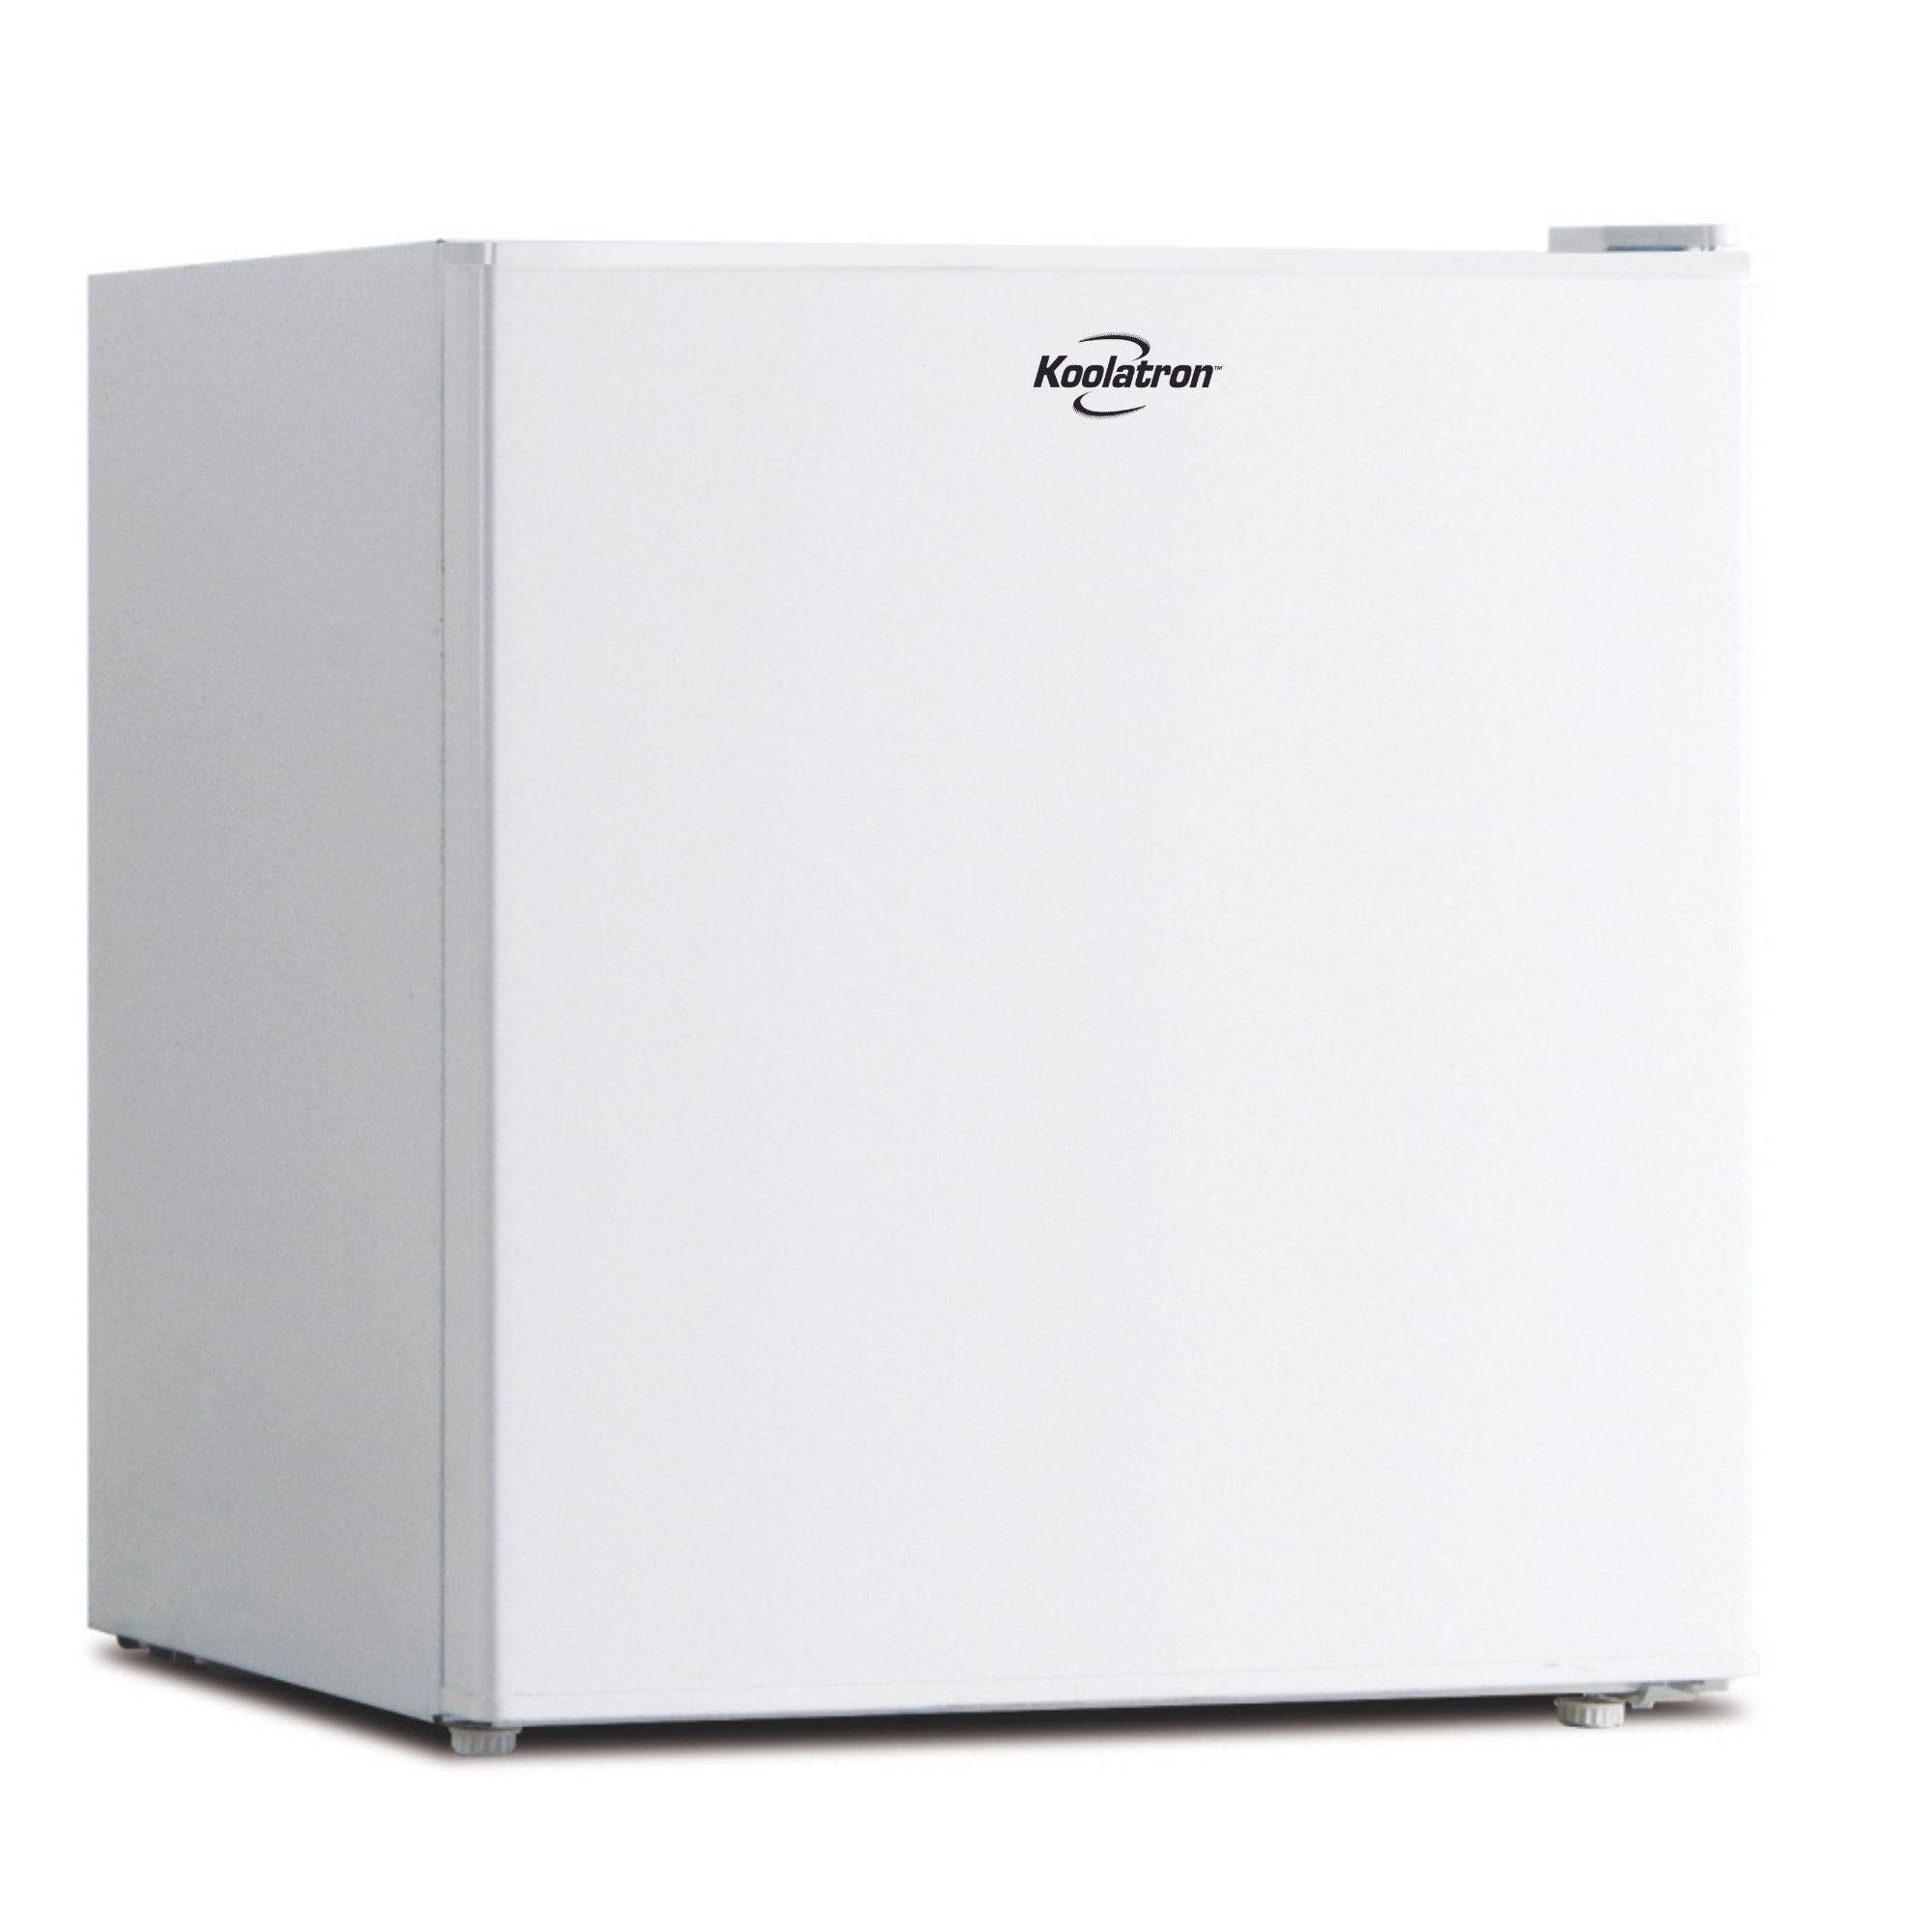 Honeywell 1.6 Cu. ft. Compact Refrigerator in Stainless Steel with Freezer